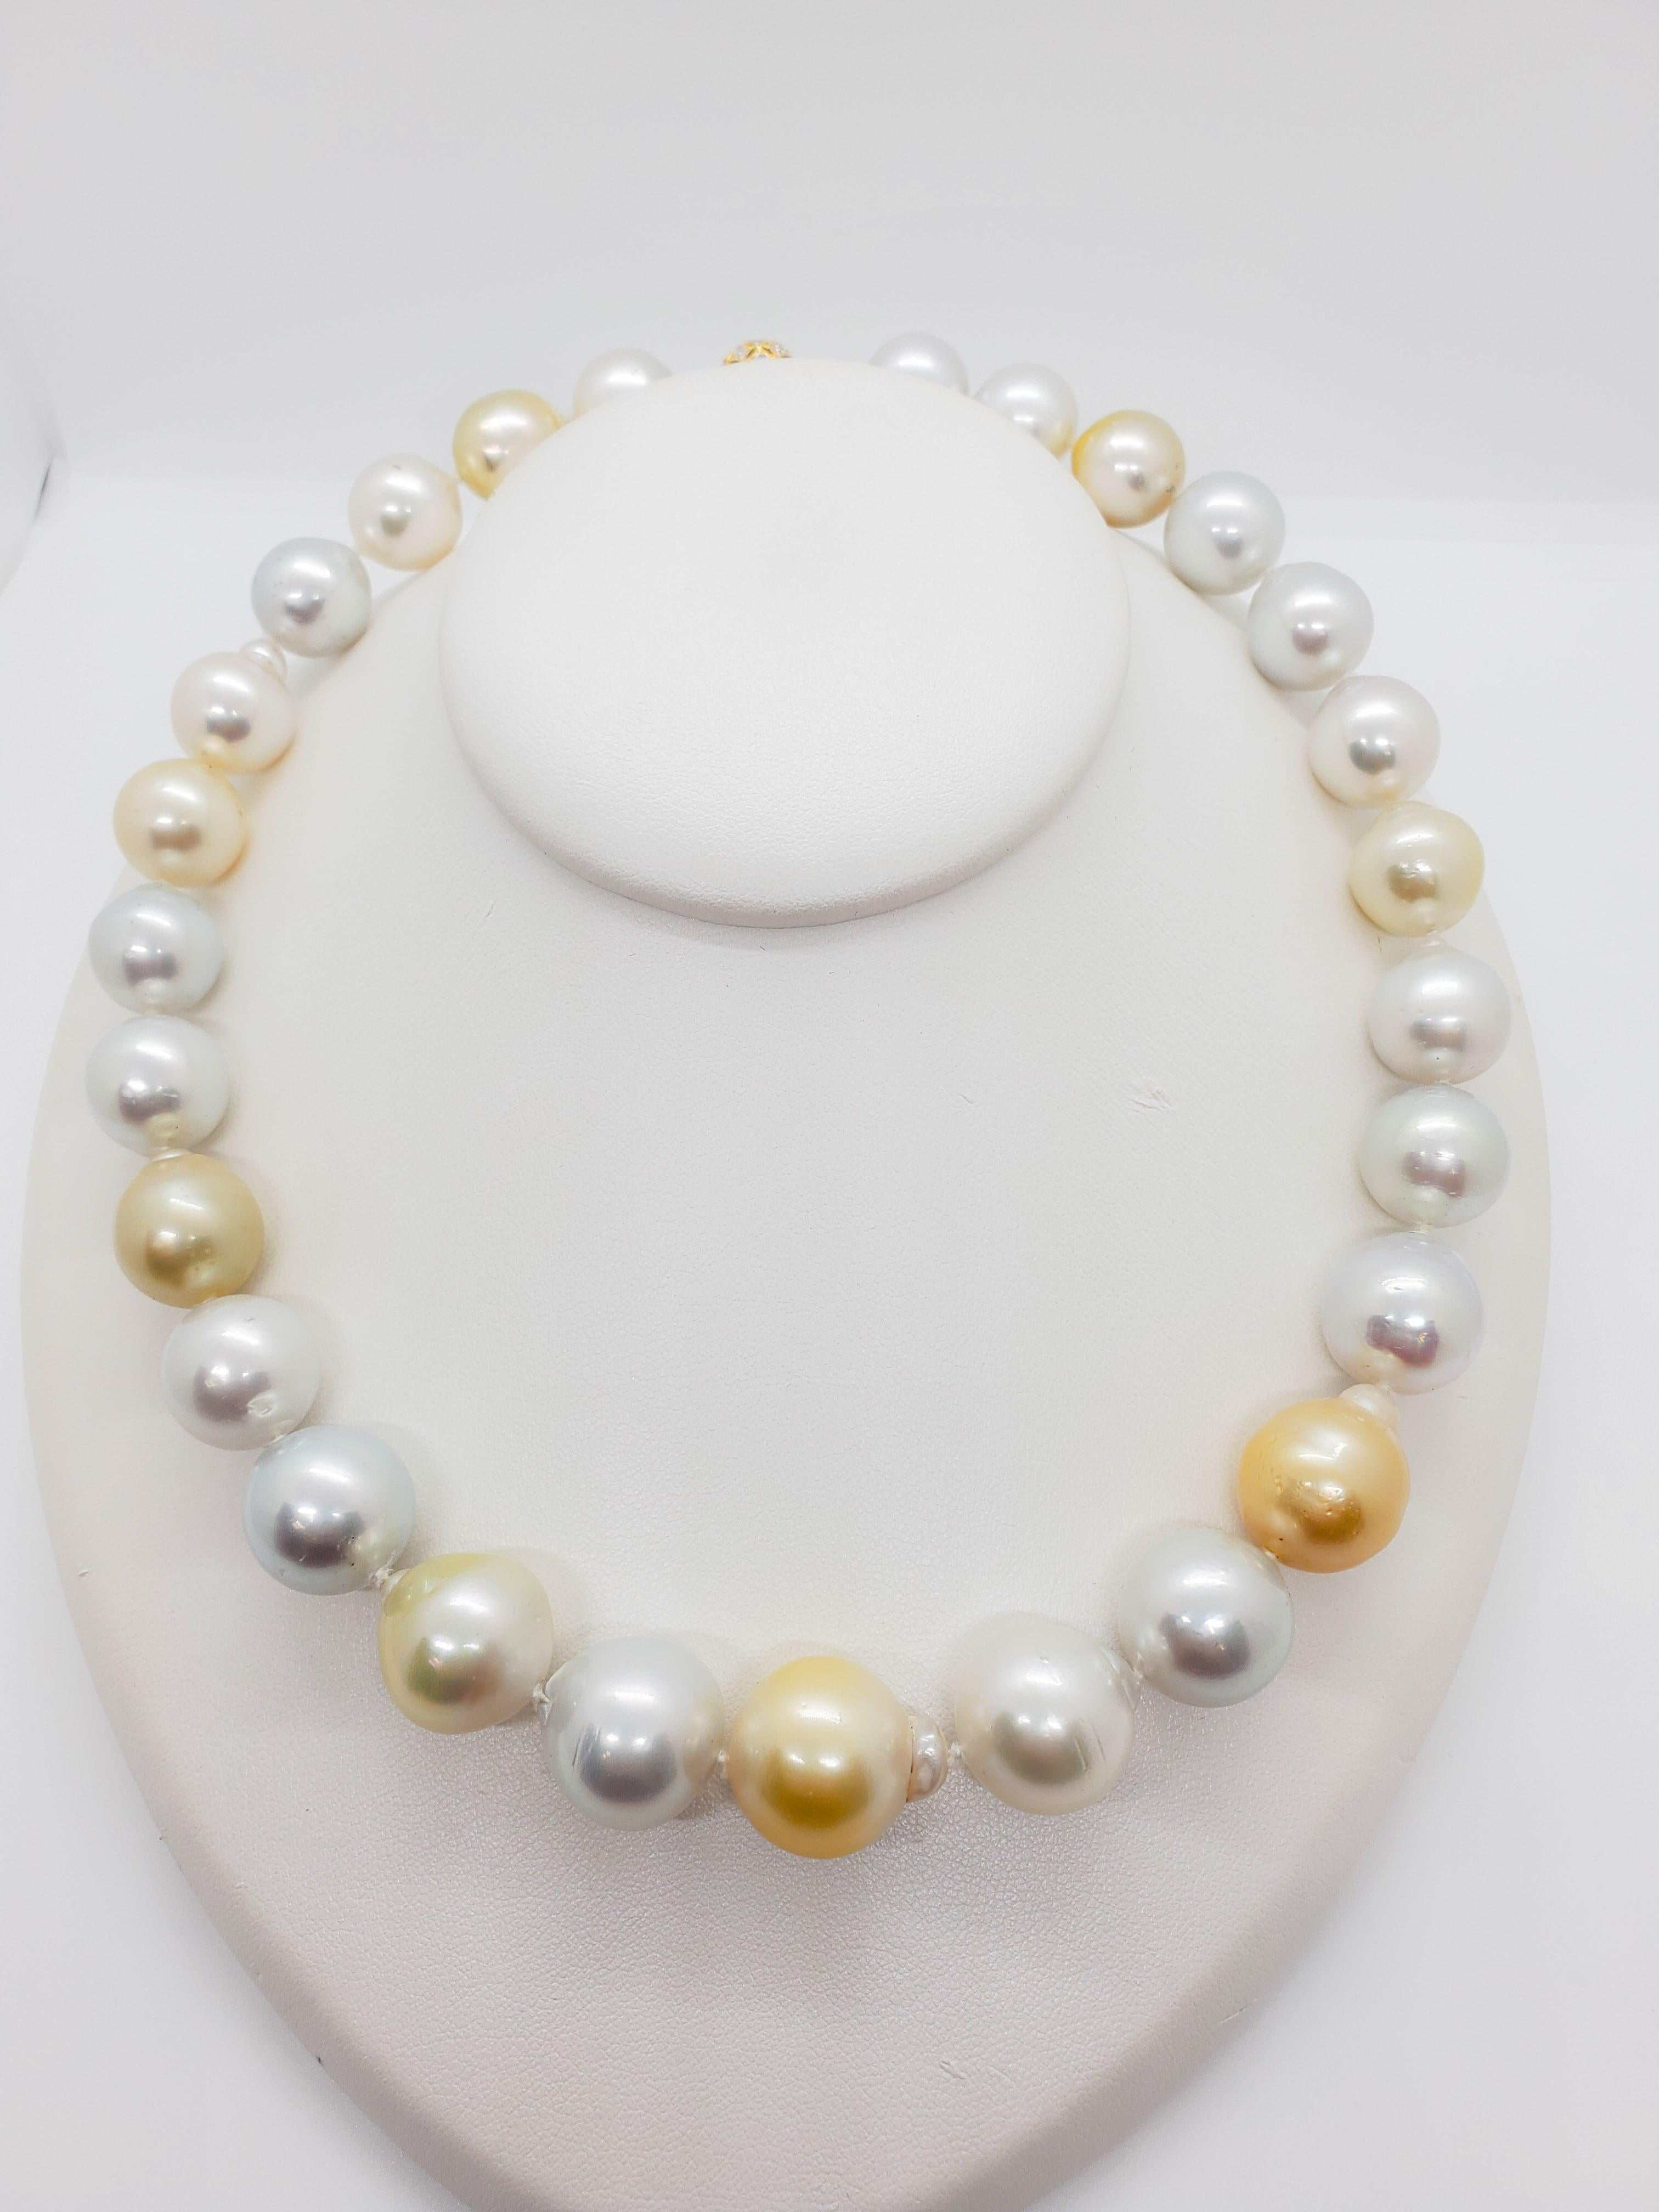  White and Yellow South Sea Pearl Necklace with Diamond Clasp For Sale 2